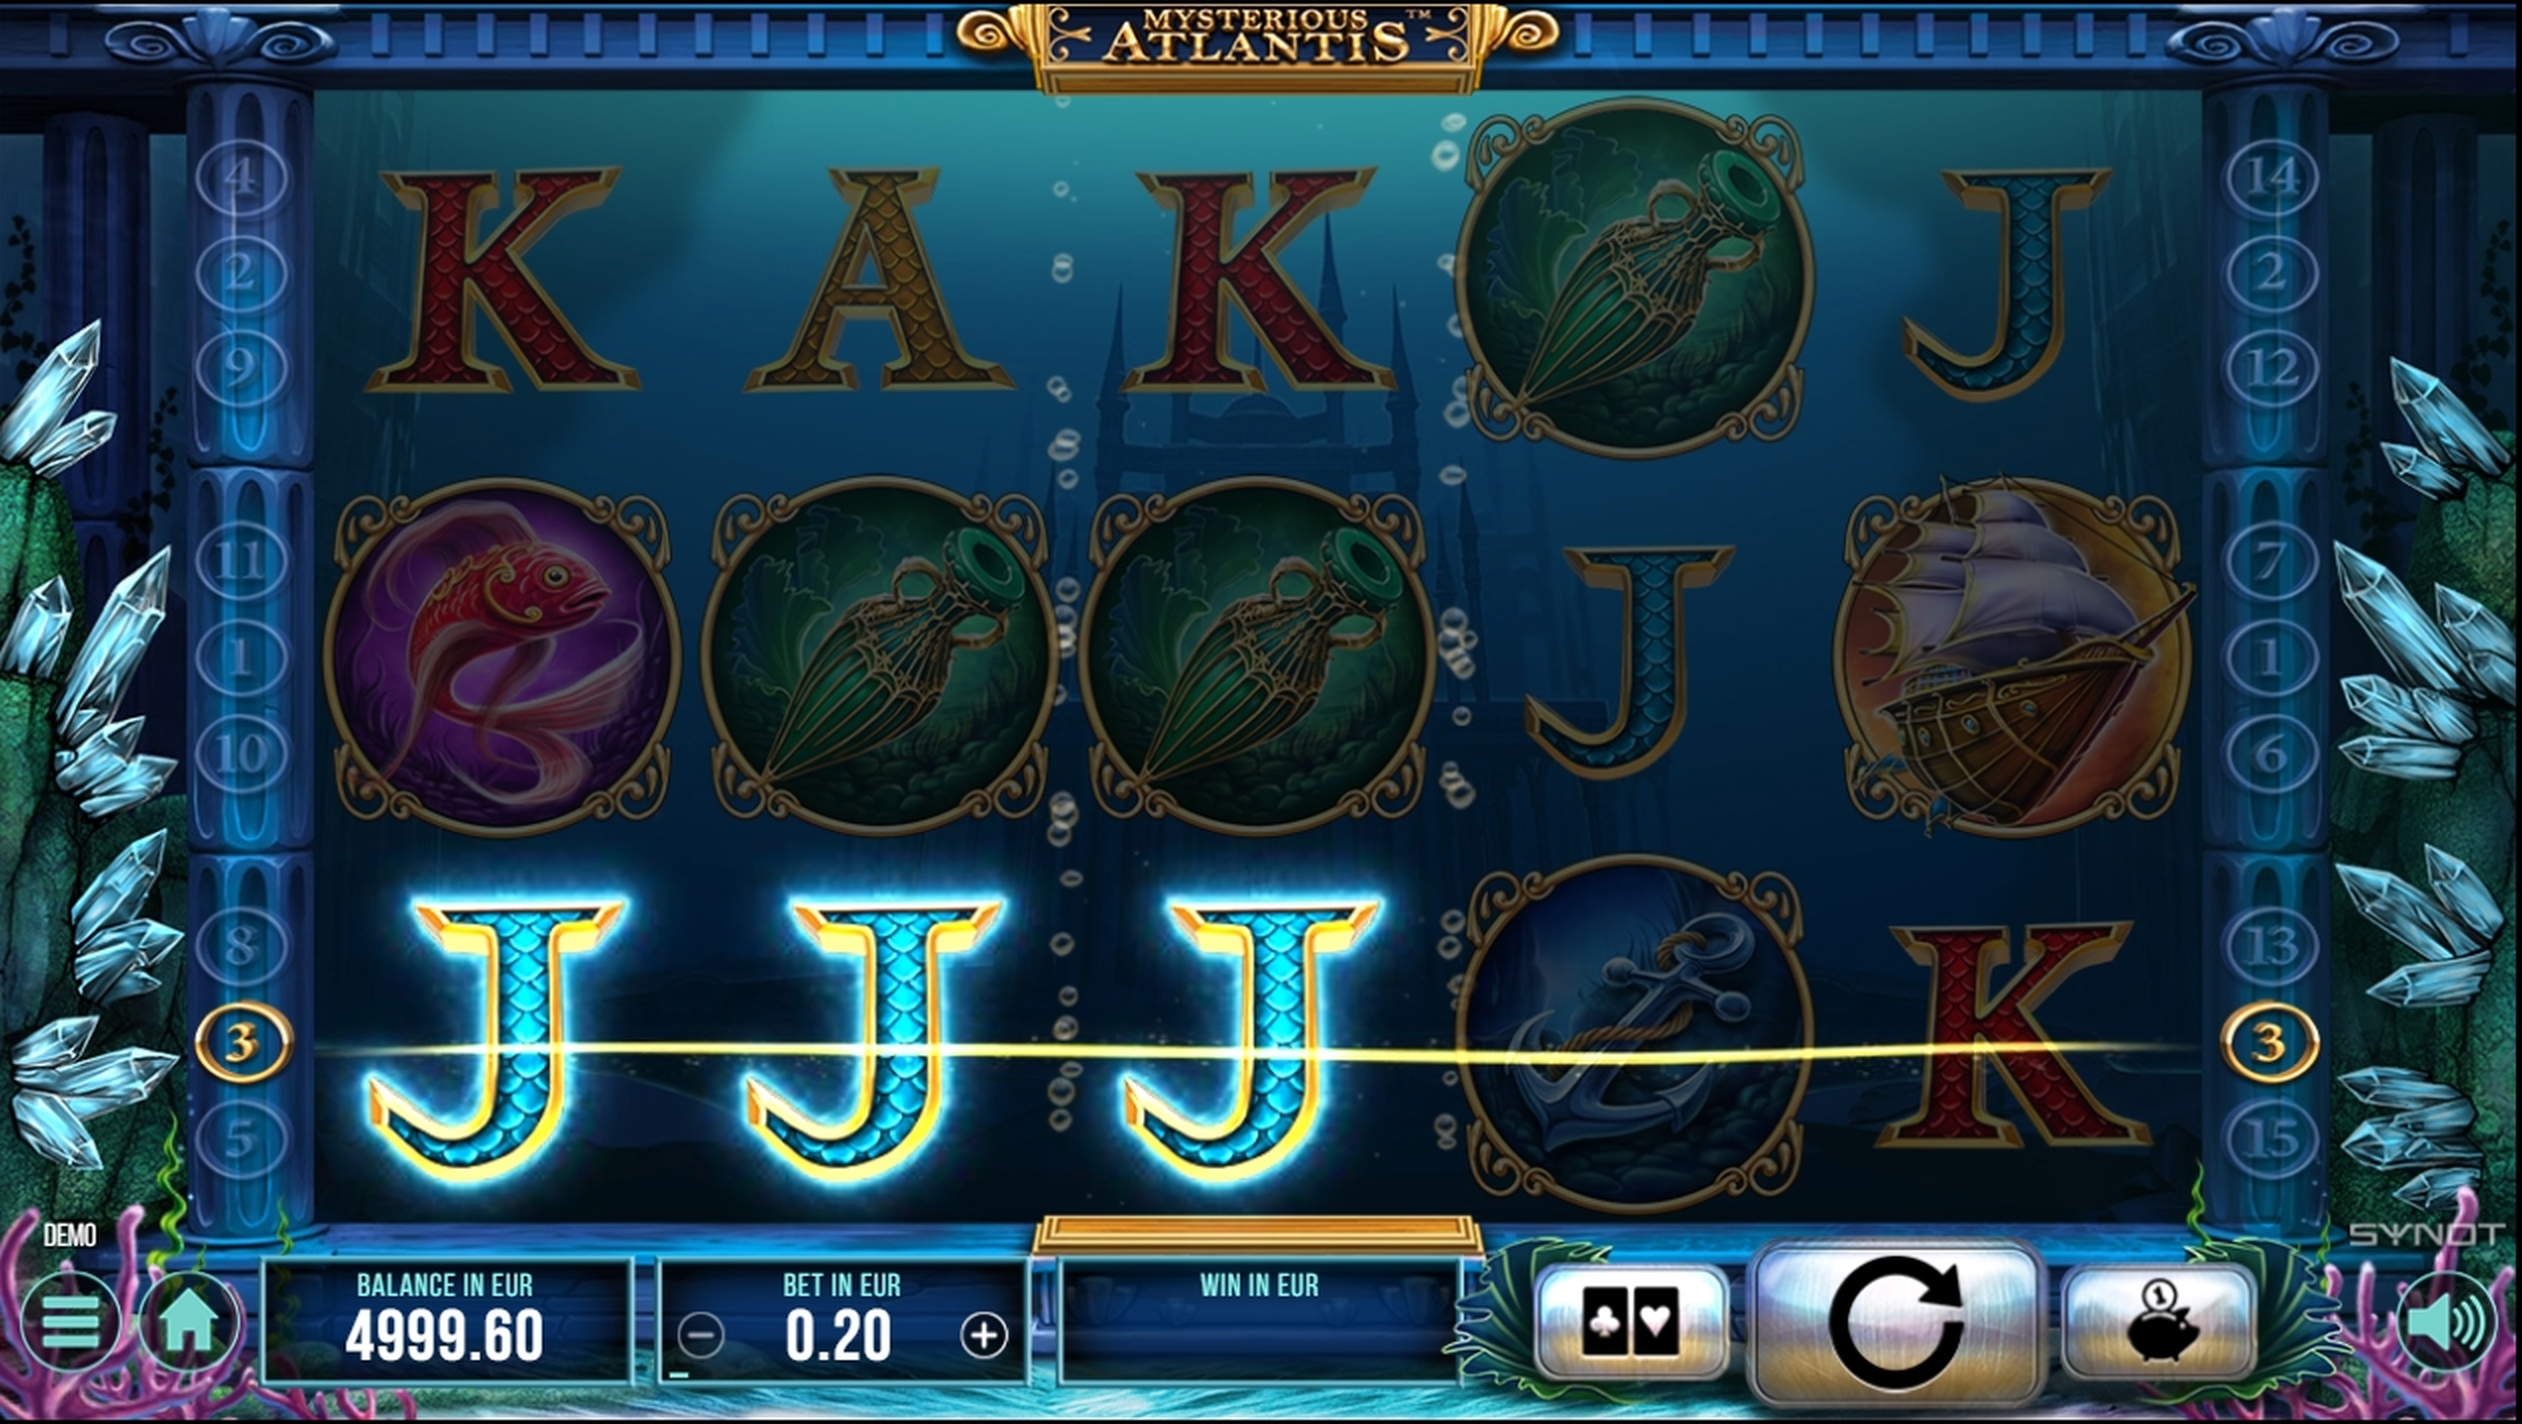 Win Money in Mysterious Atlantis Free Slot Game by Synot Games